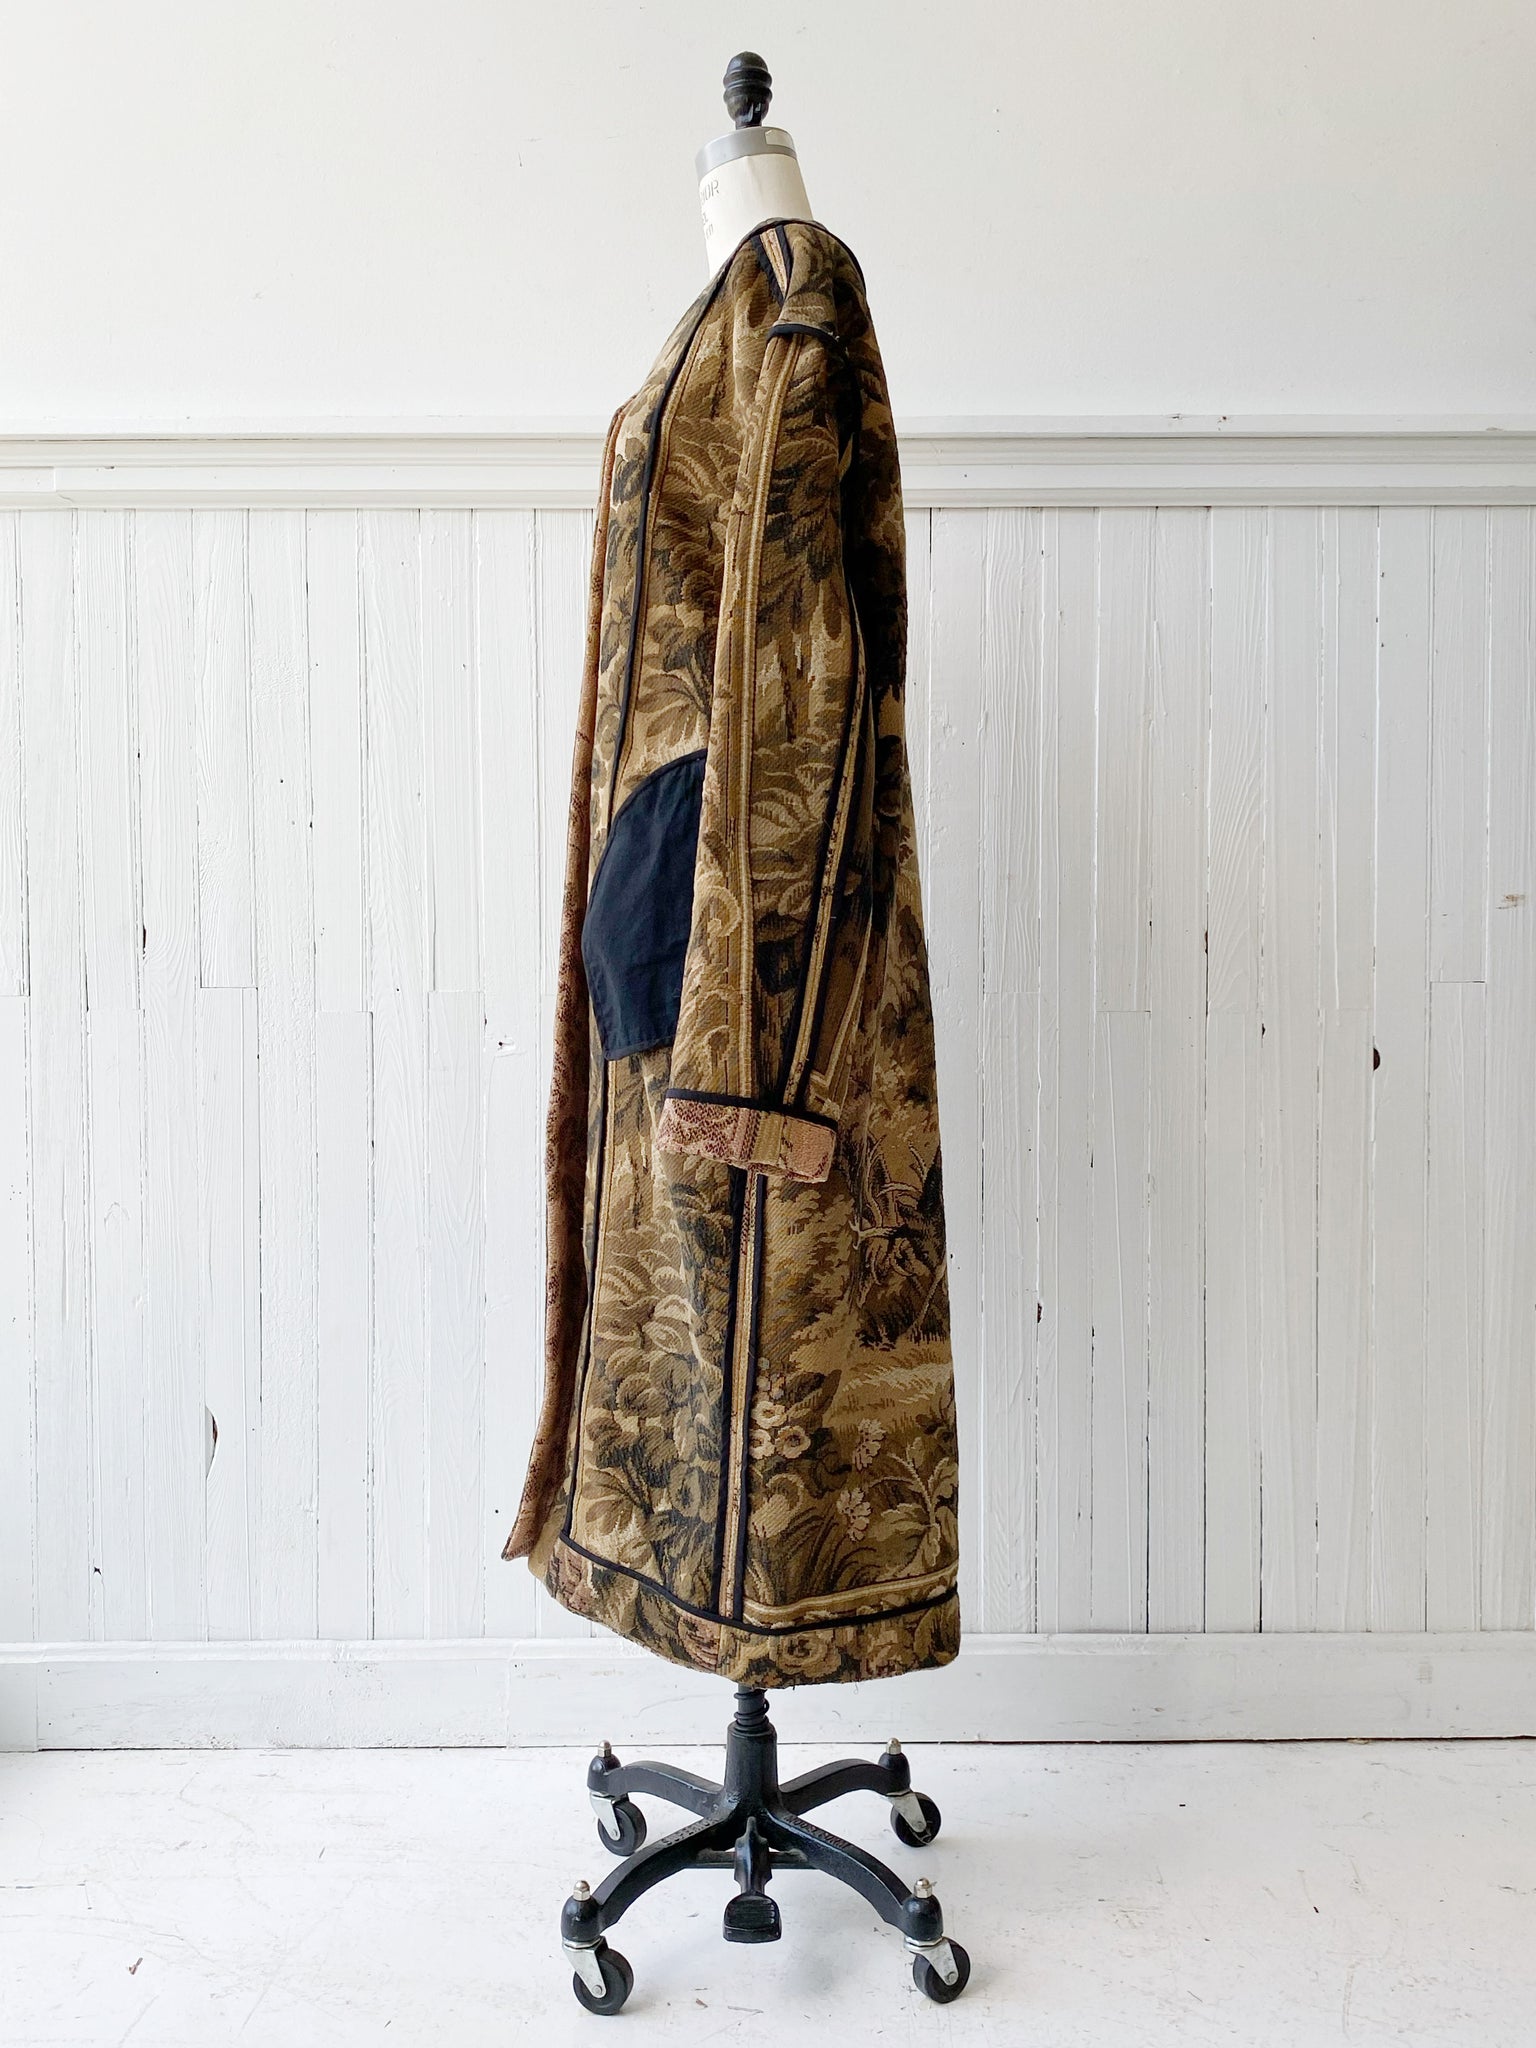 stag and castle tapestry coat